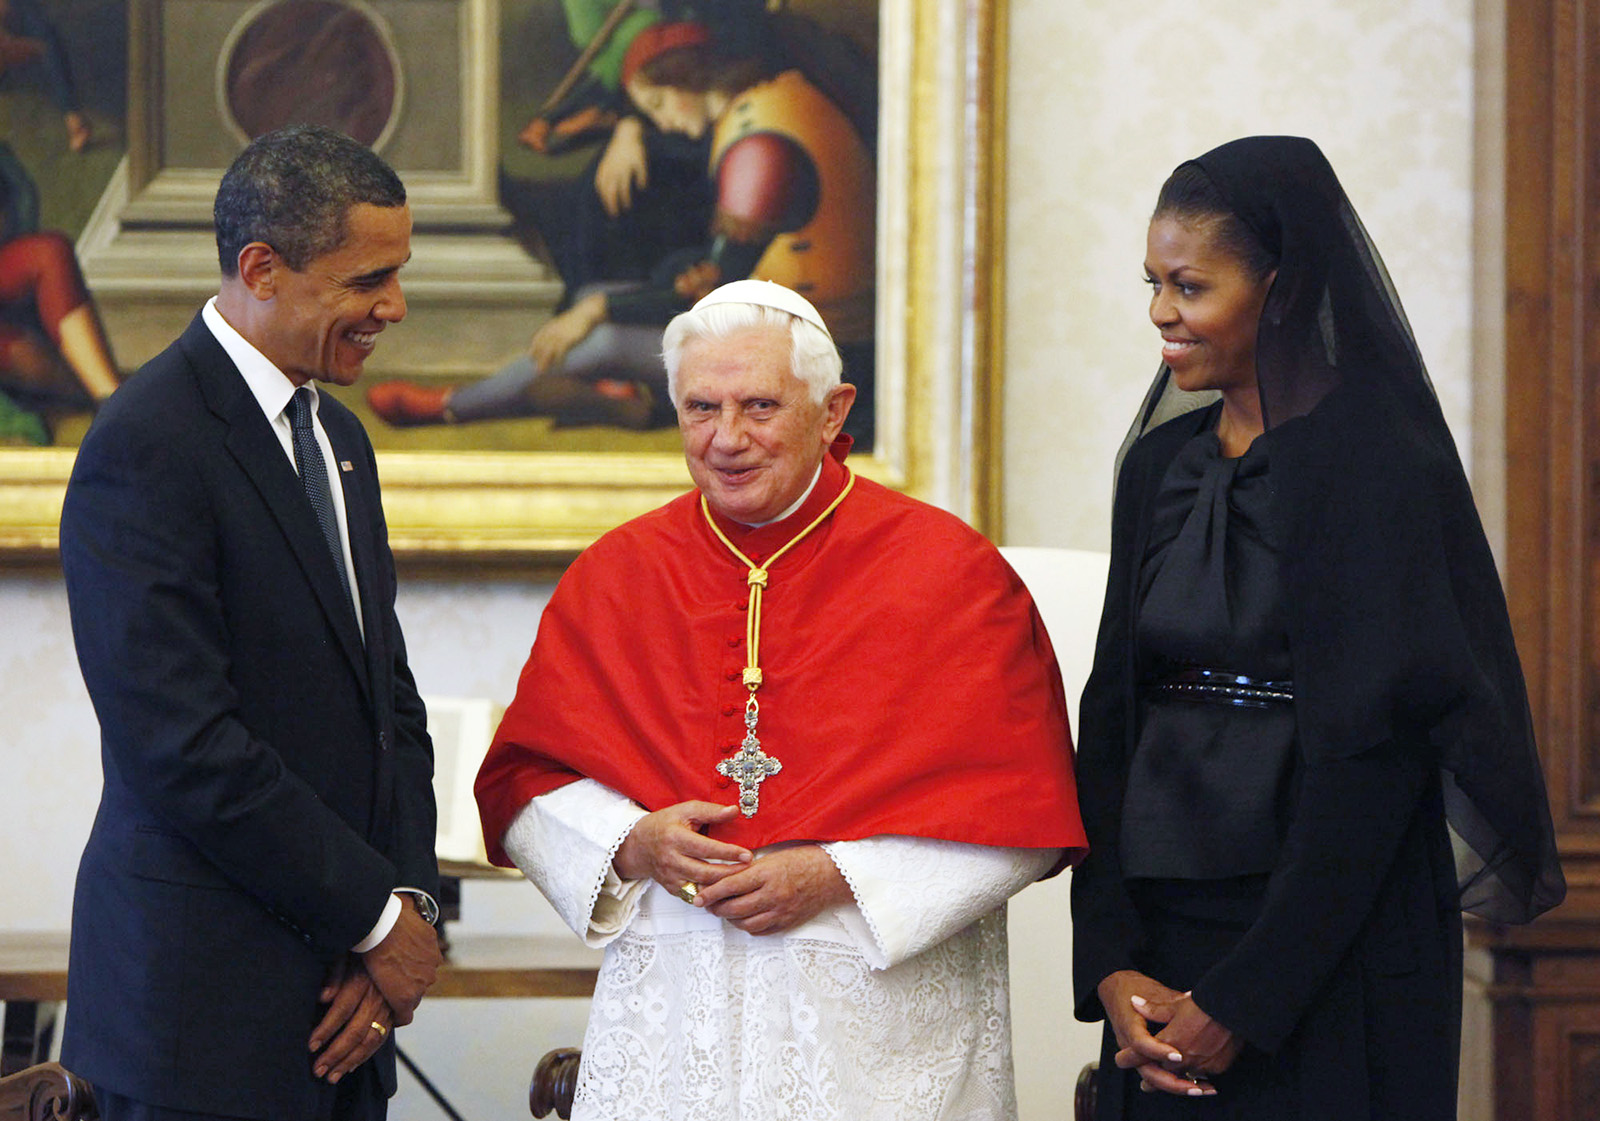 President Barack Obama and first lady Michelle Obama meet with Pope Benedict XVI, at the Vatican, July 10, 2009. (AP Photo/Haraz N. Ghanbari, file)